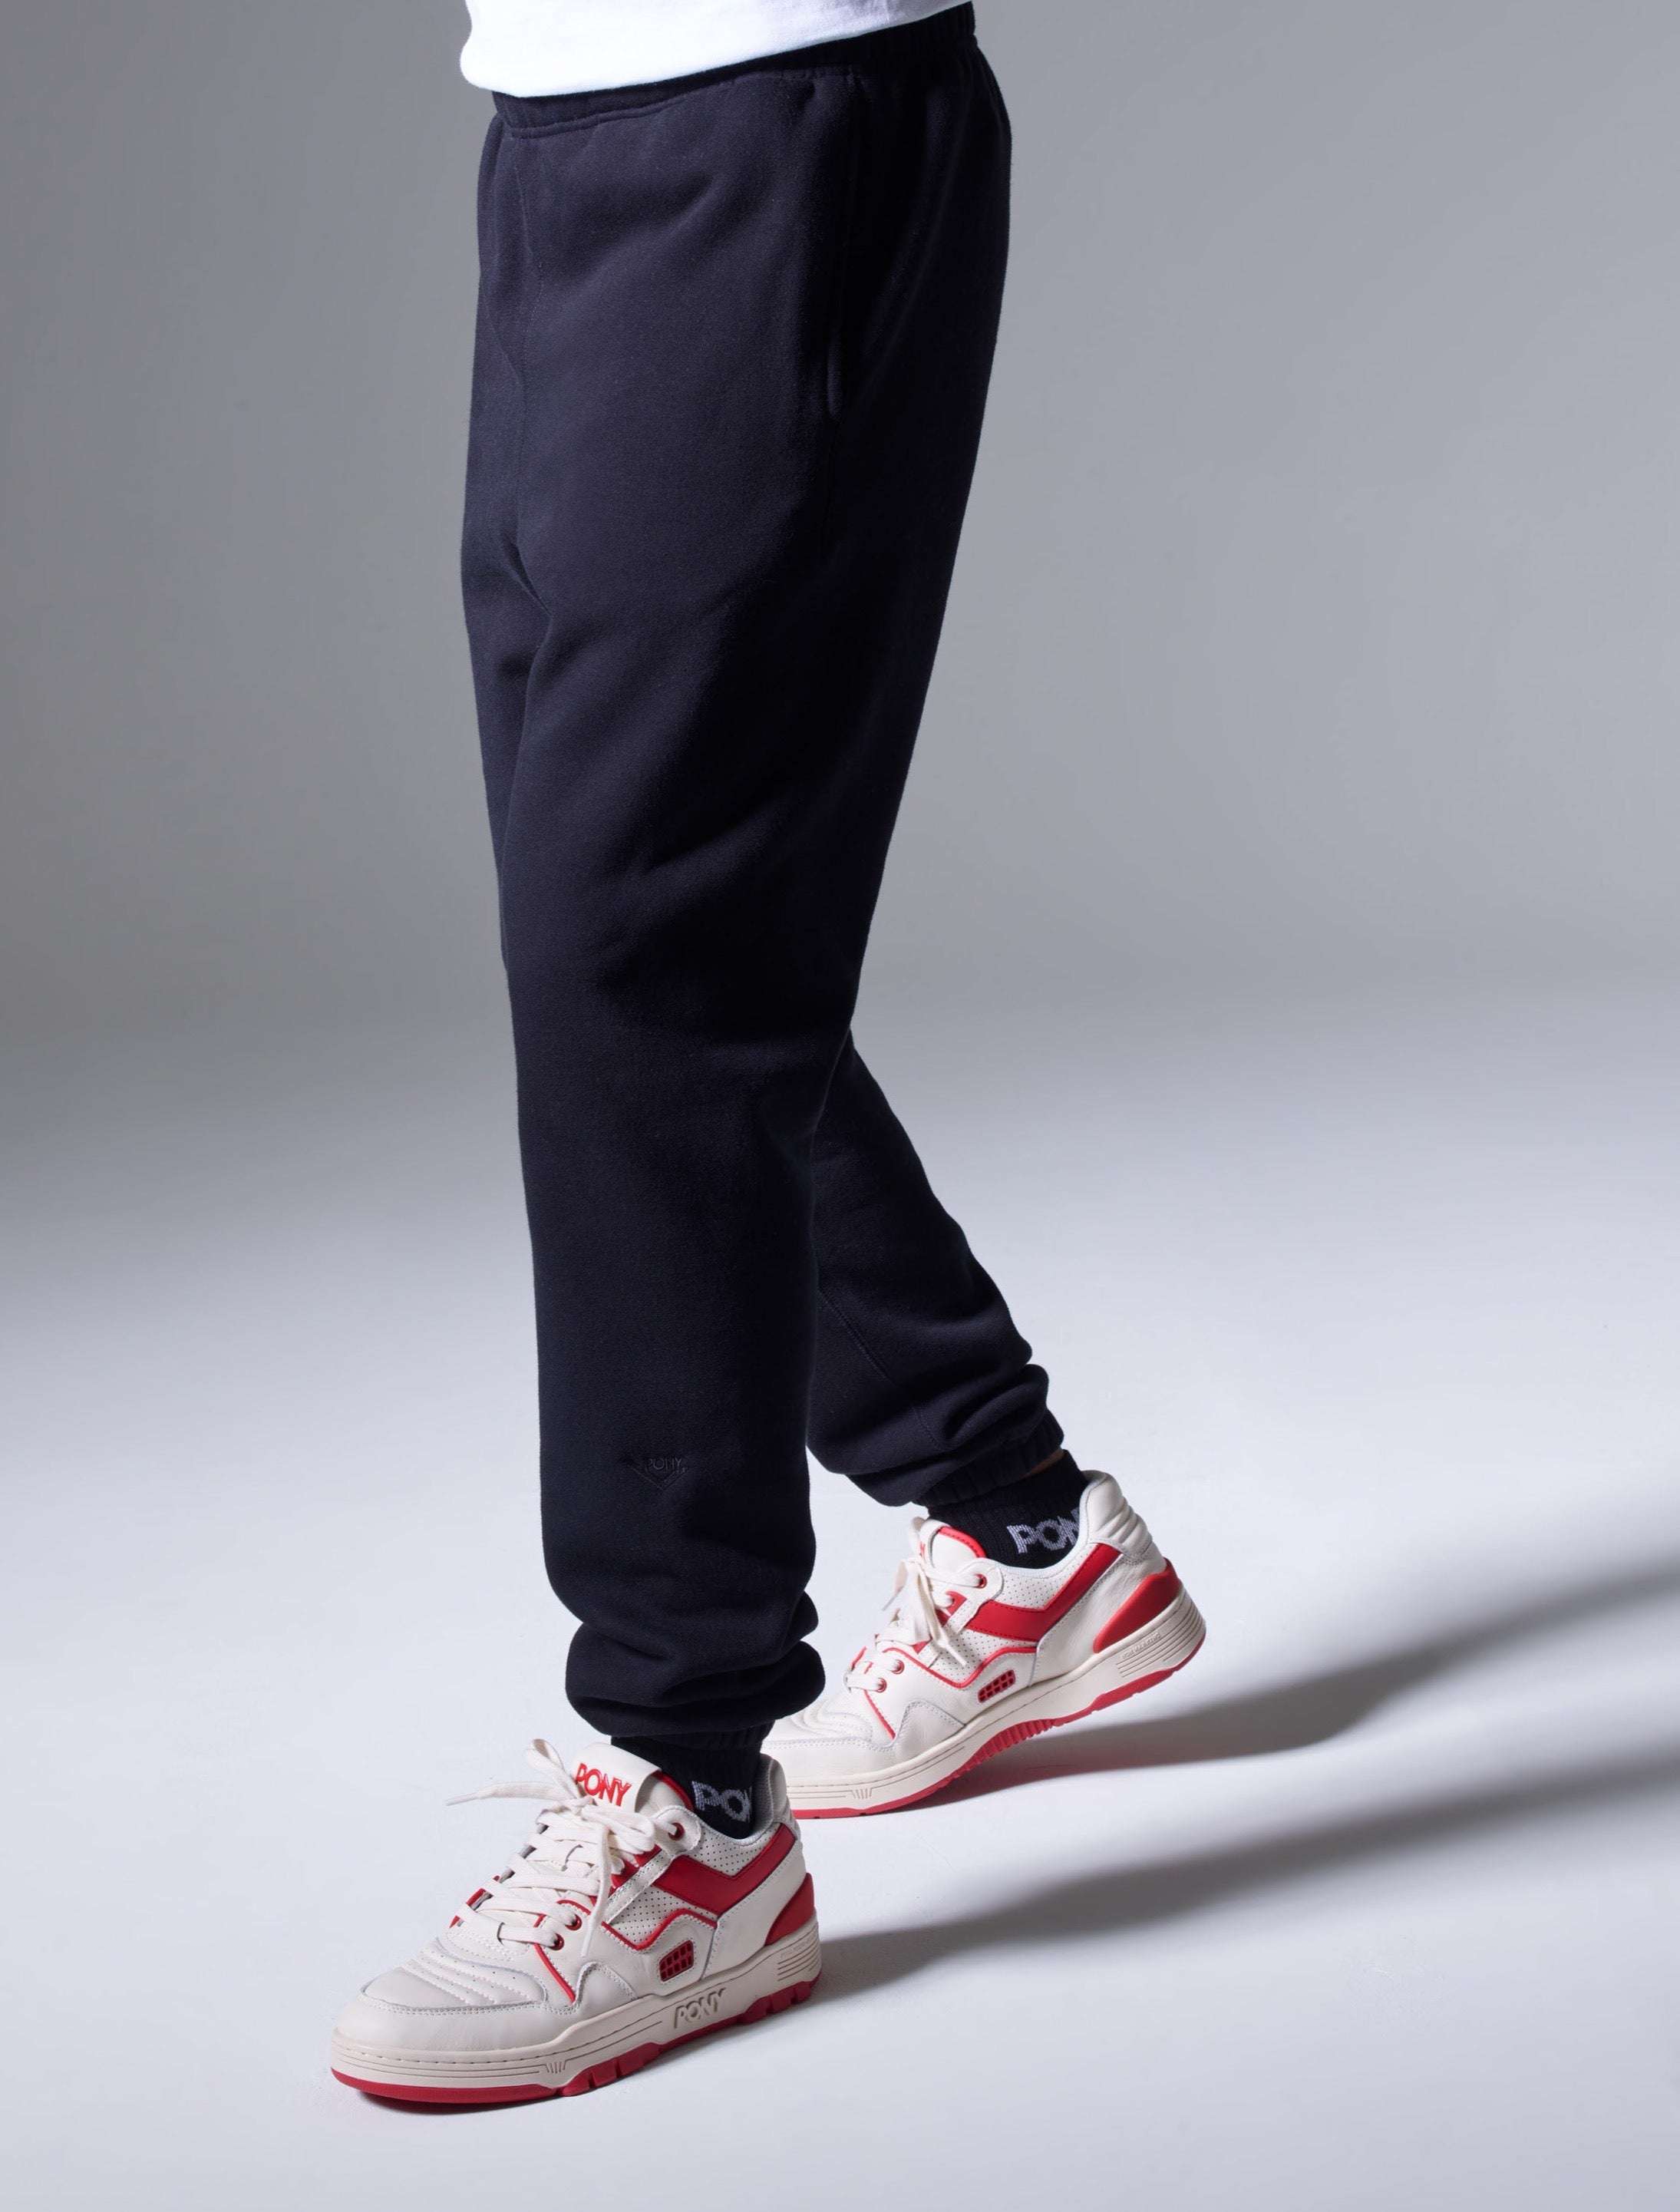 A side shot of a male model wearing PONY Jogger pants with PONY red low top M-100s.